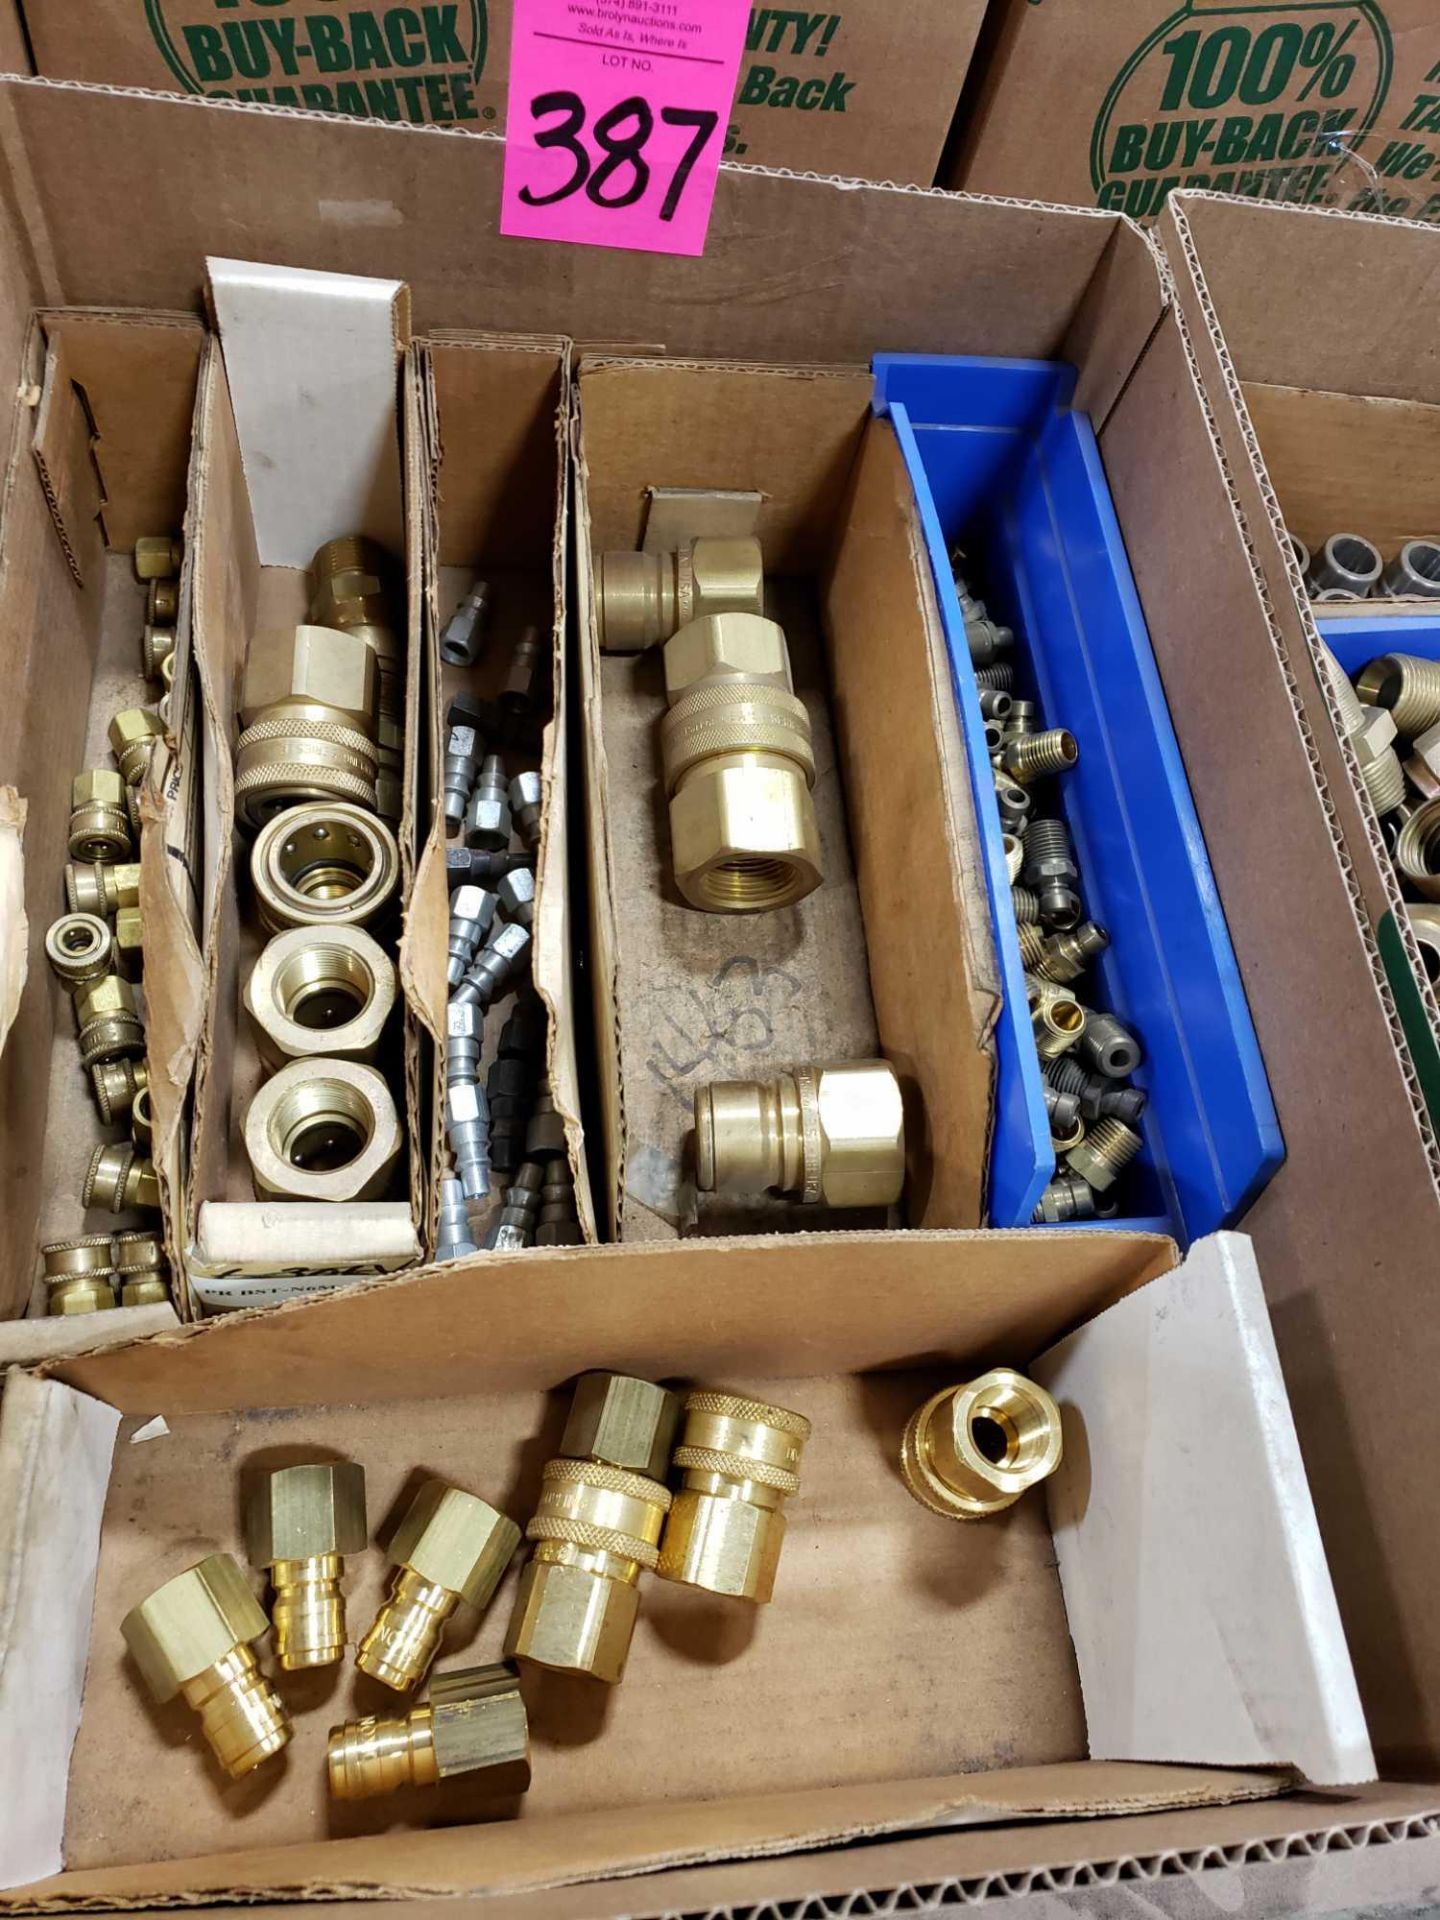 Lot of assorted hydraulic and pneumatic fittings. New as pictured.